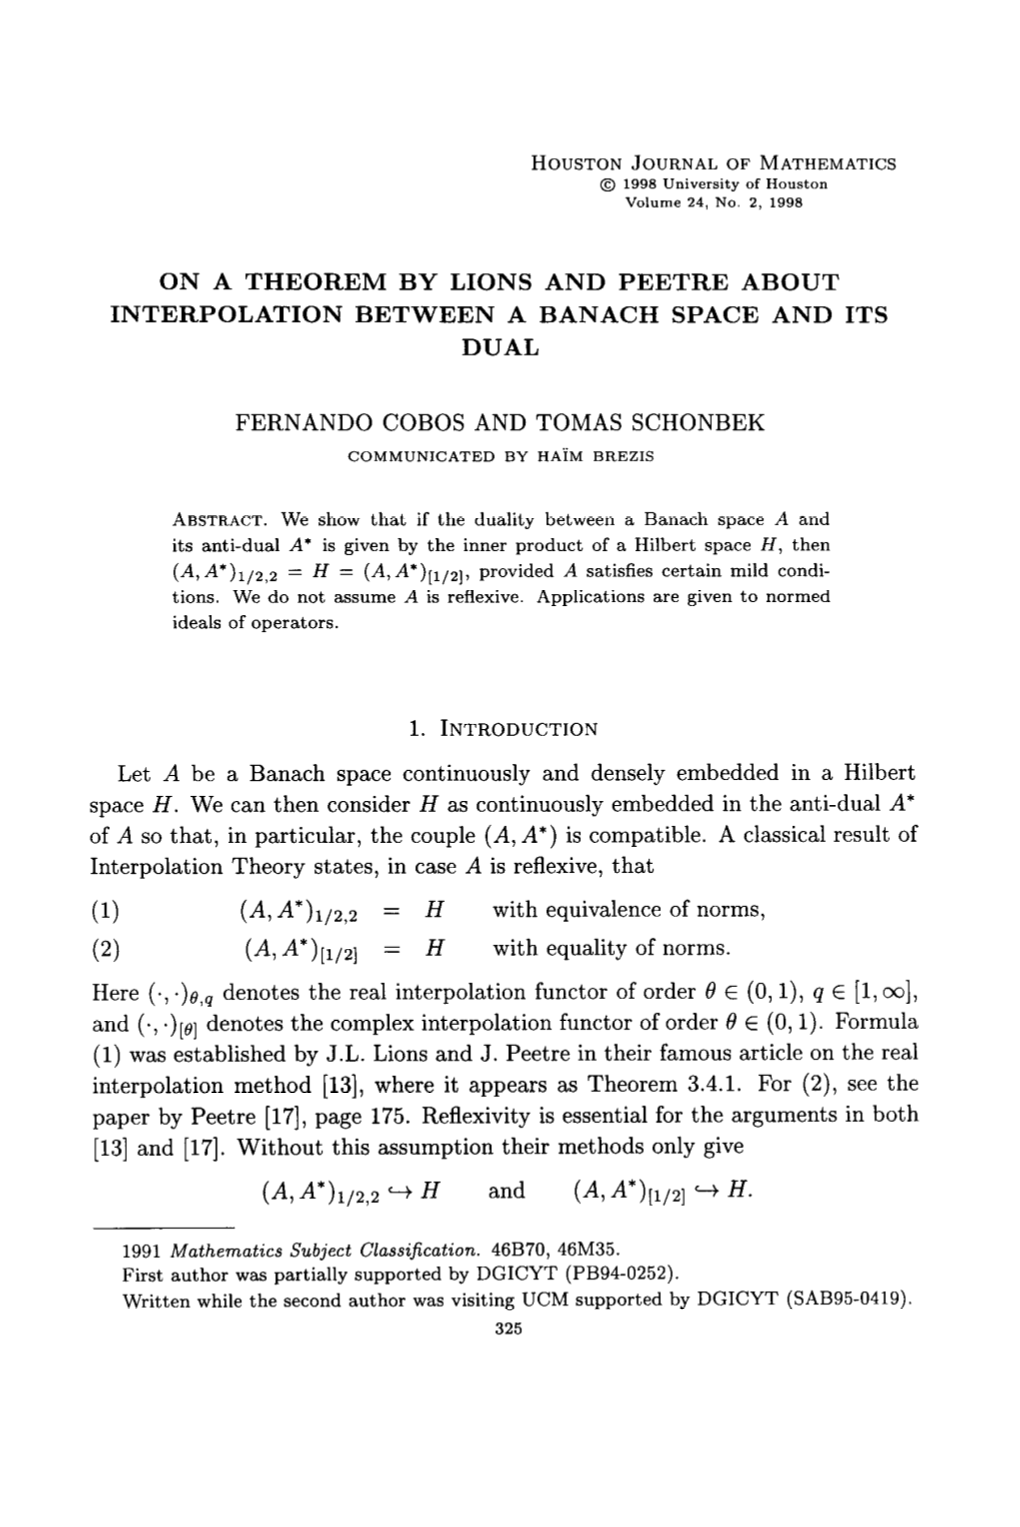 On a Theorem by Lions and Peetre About Interpolation Between a Banach Space and Its Dual